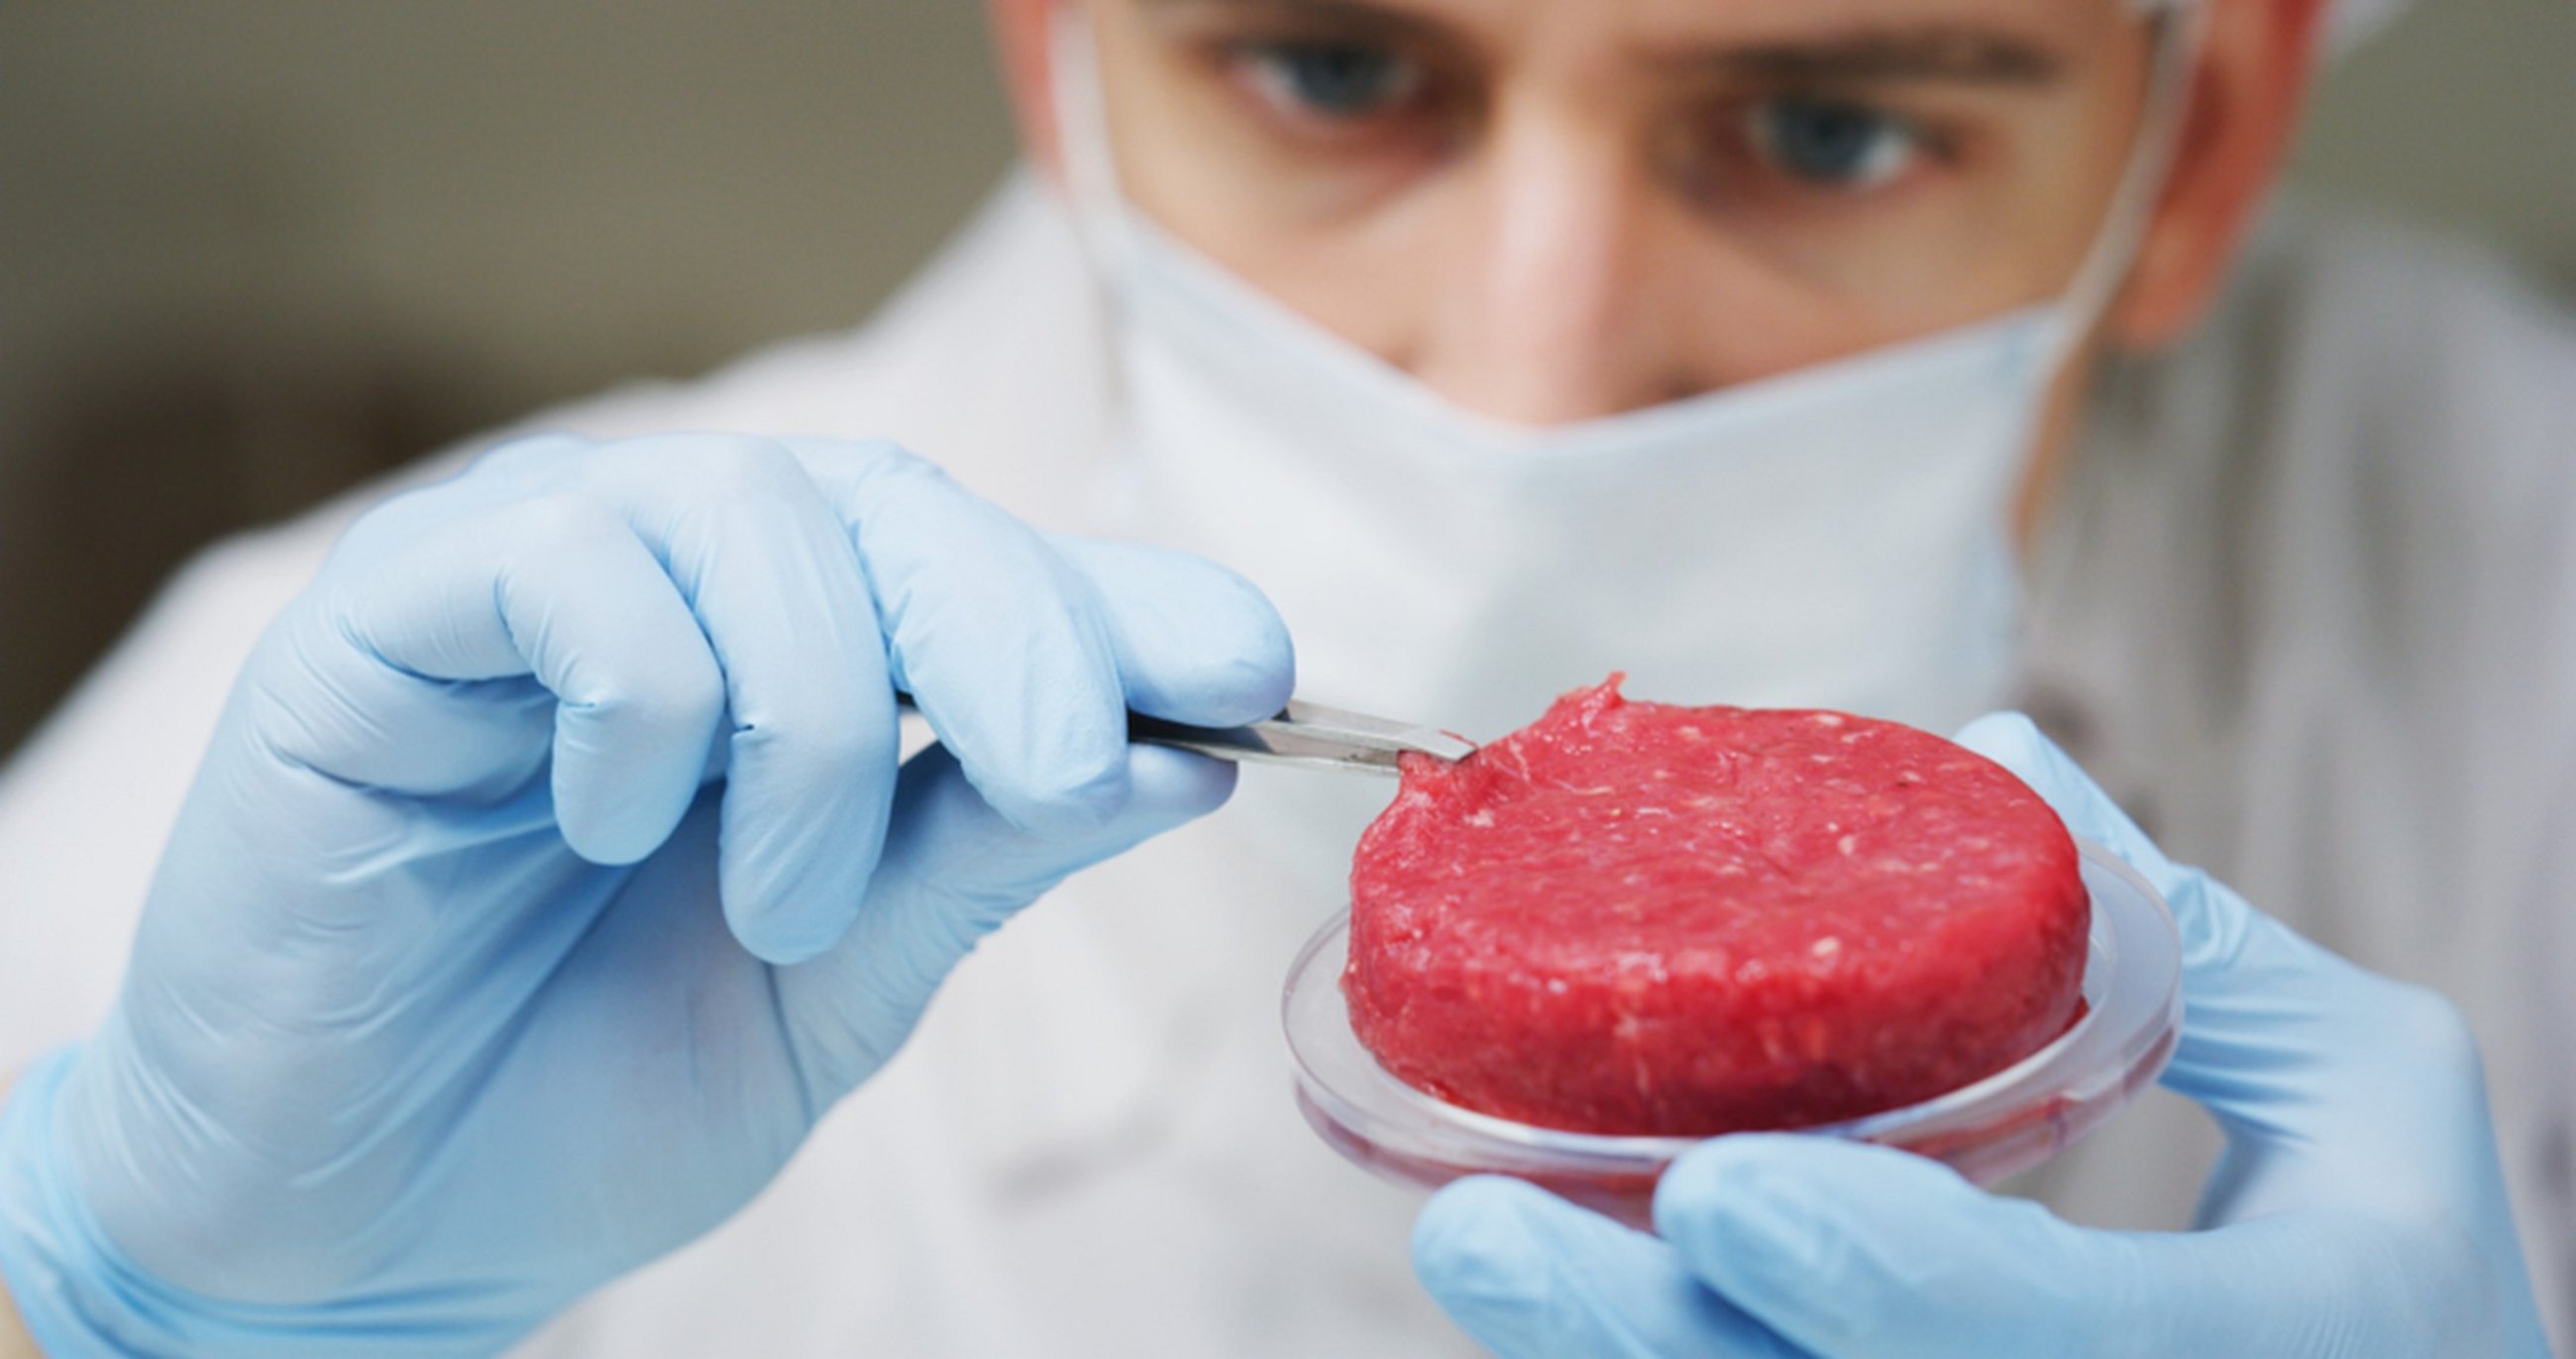 Cultured Meat in the EU Market: Caution, not preconceived barriers (cepAdhoc)